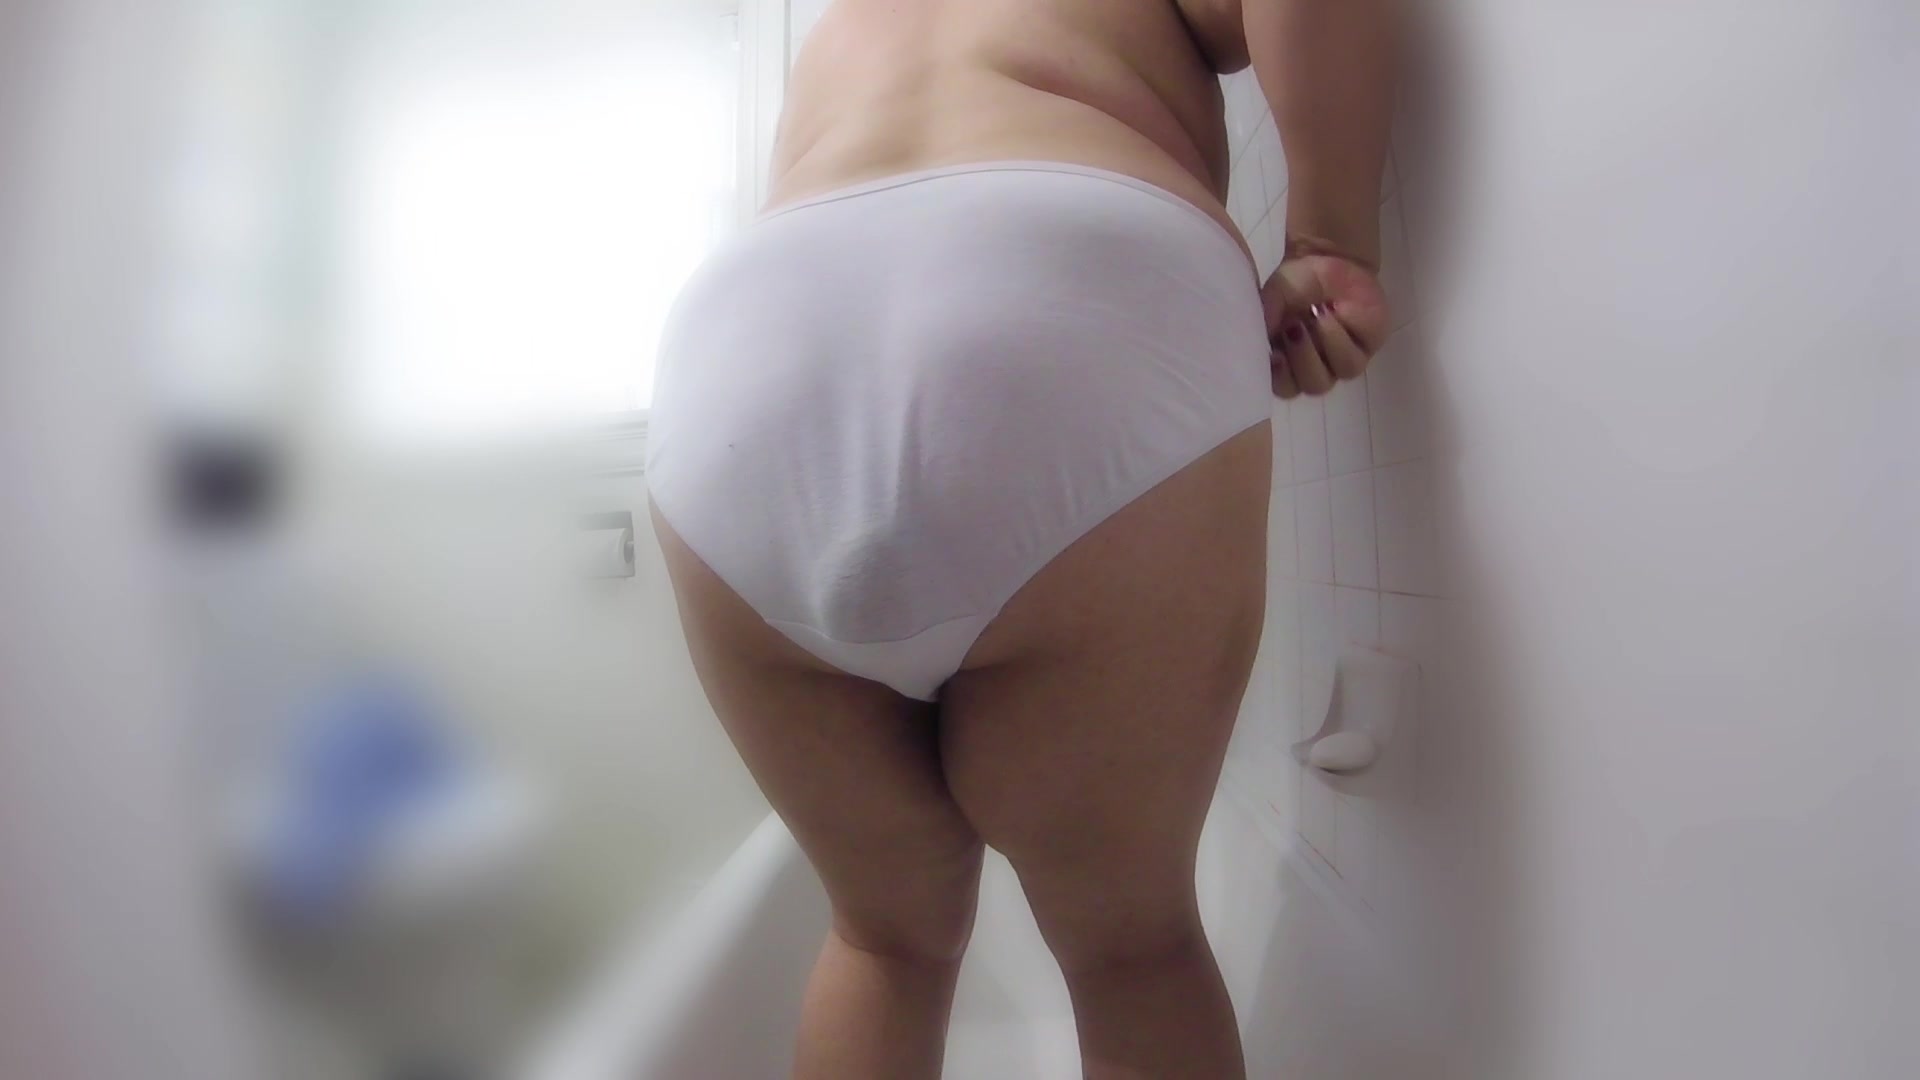 Shemales In White Cotton Panties - Pooping in White Panties (Clip) - ThisVid.com